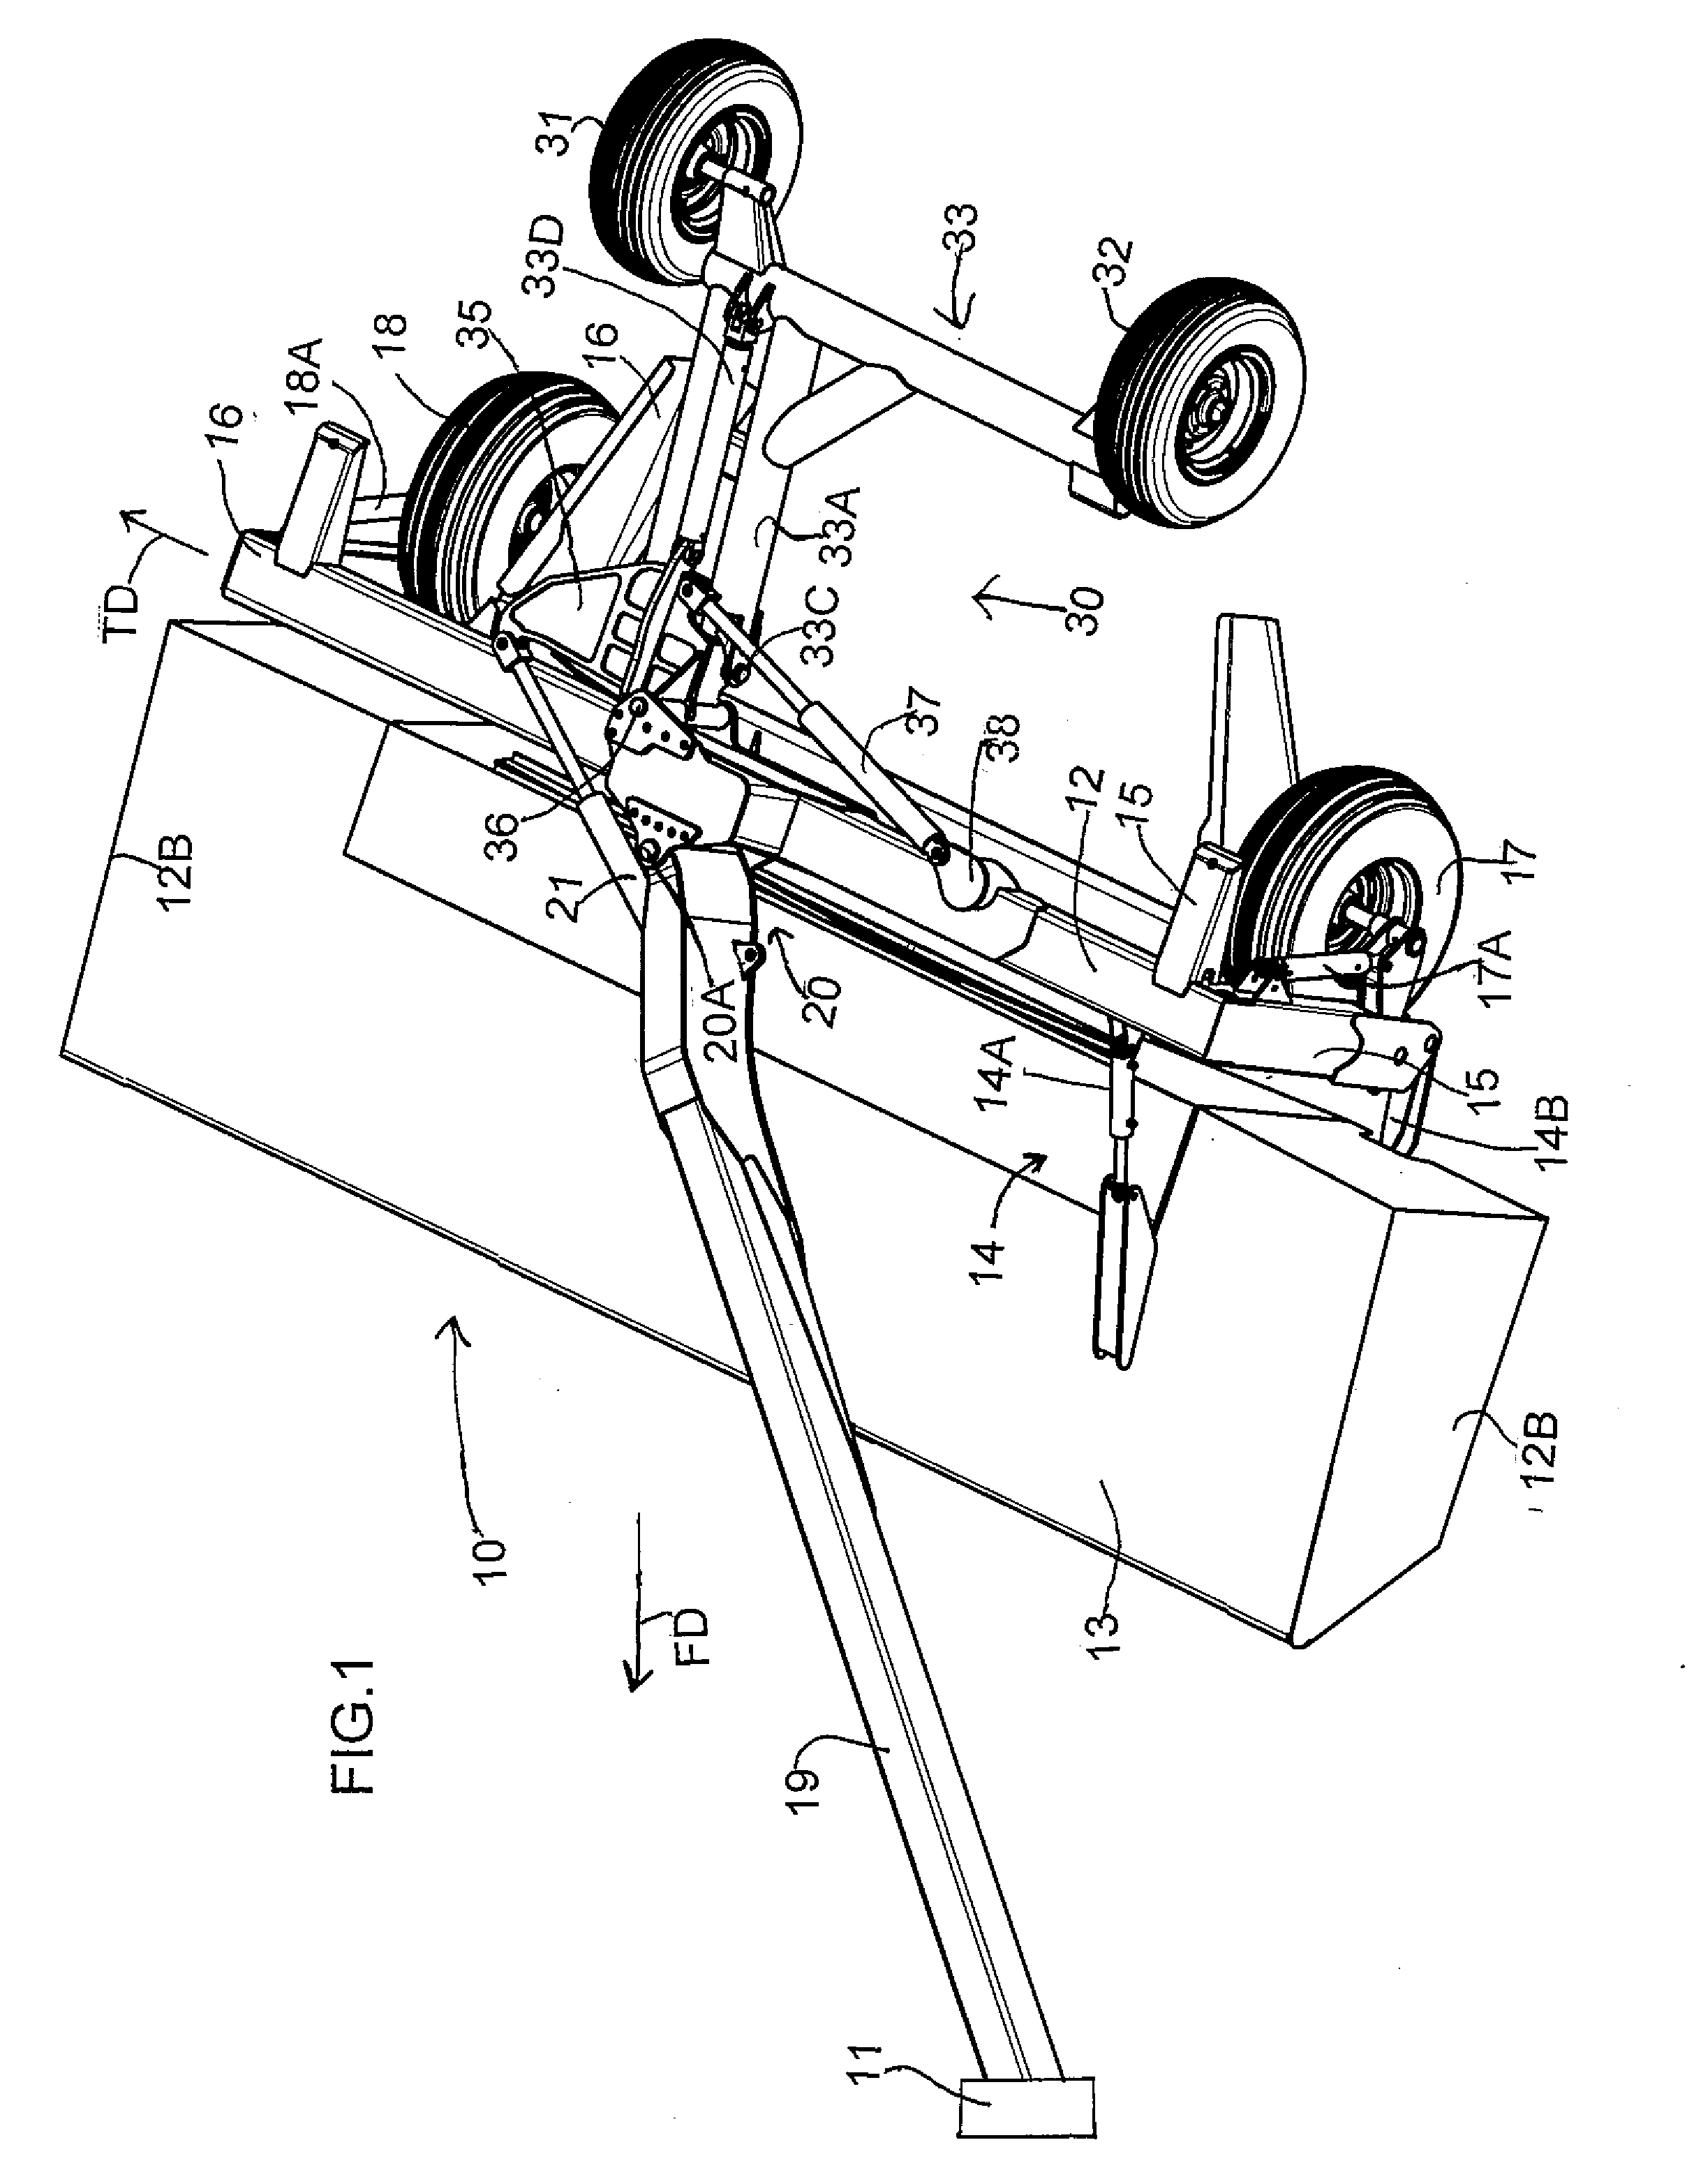 Pull-type crop harvesting machine transport system actuated at a predetermined angle of the hitch